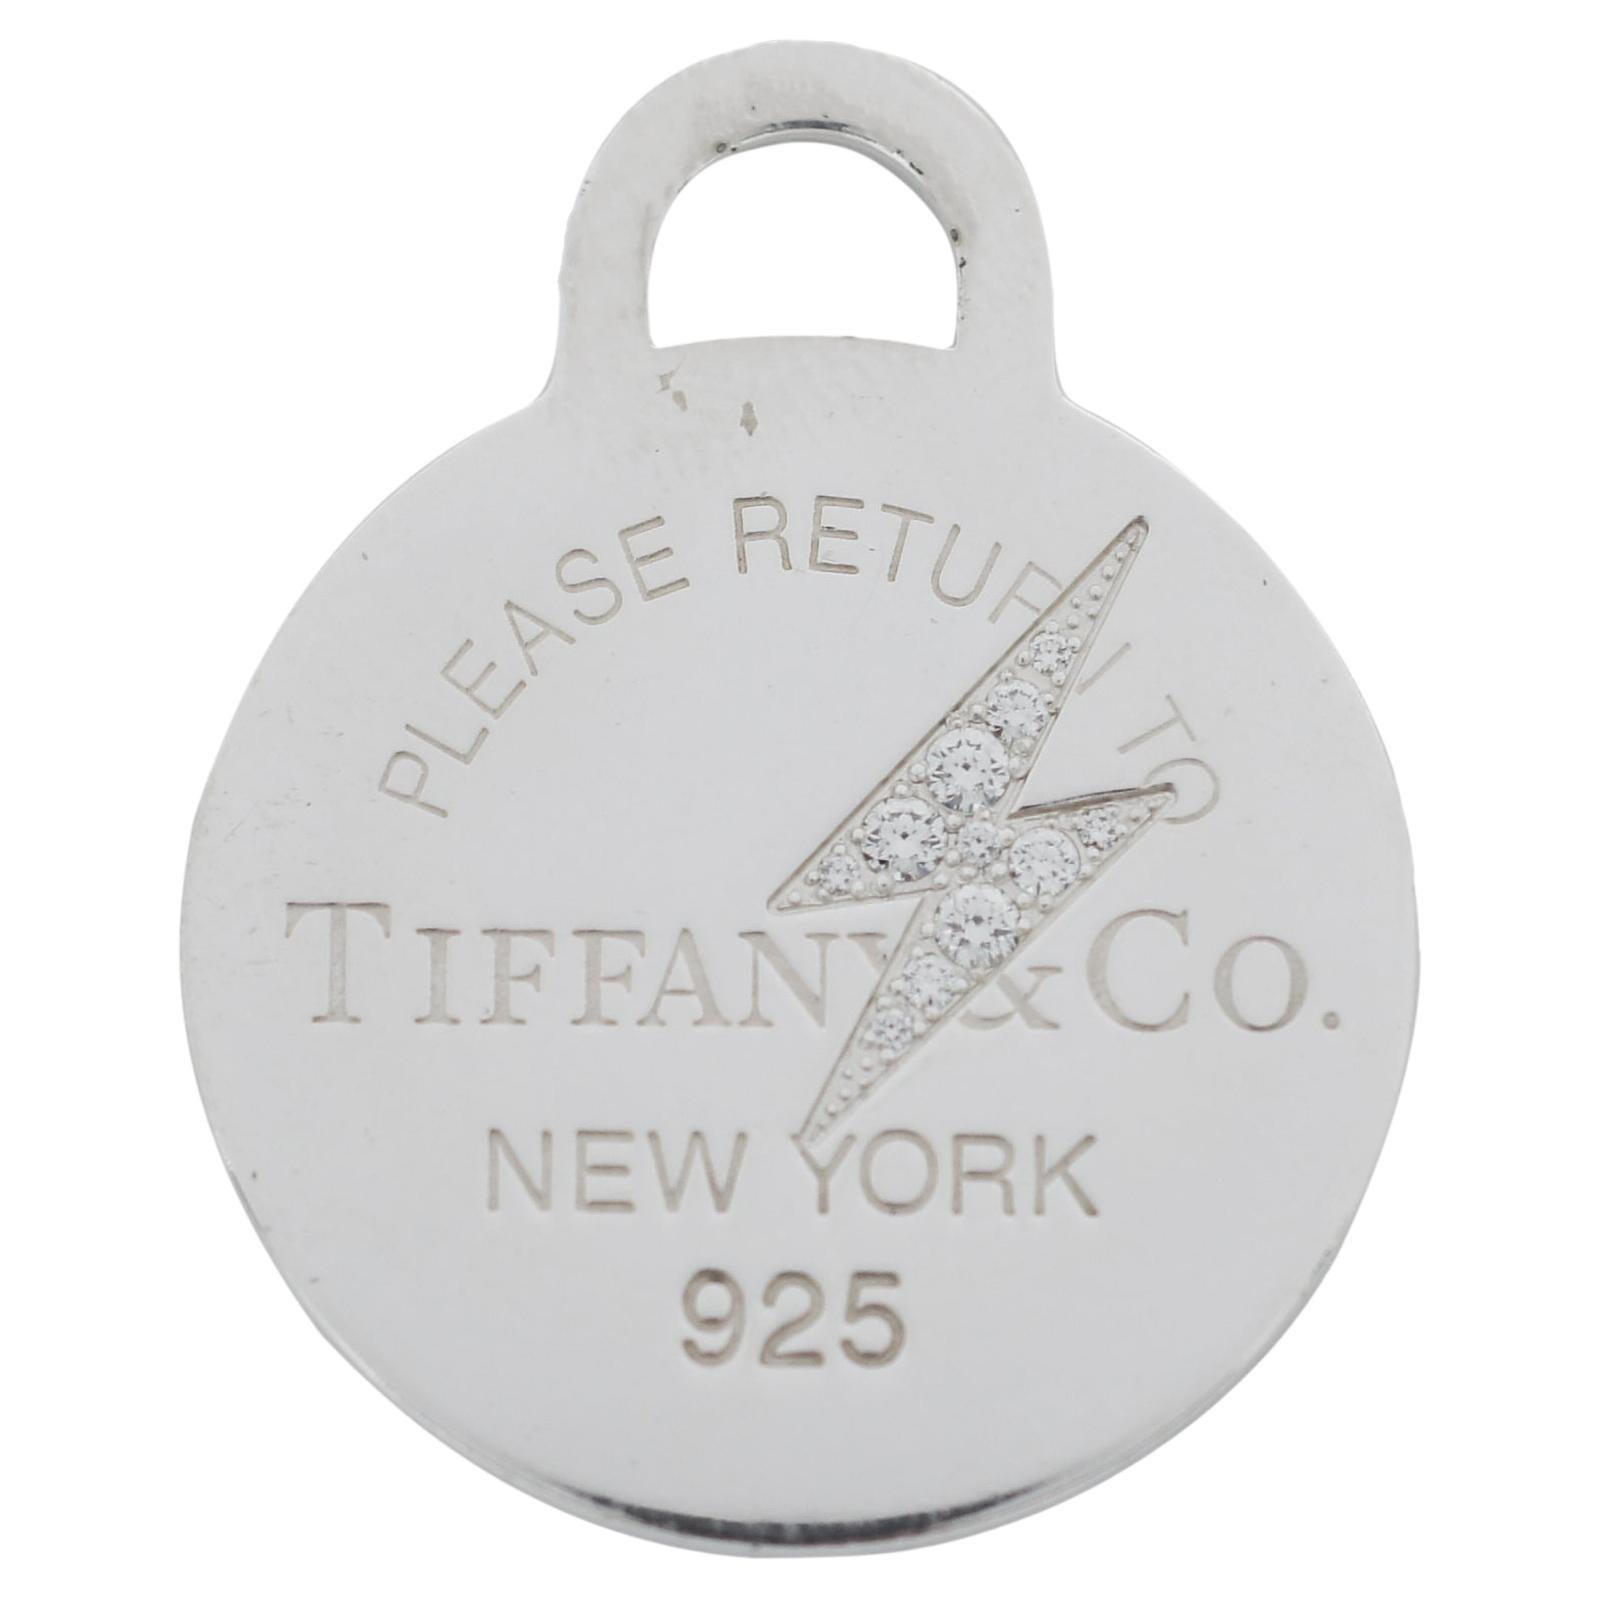 What is the 925 on Tiffany jewelry?